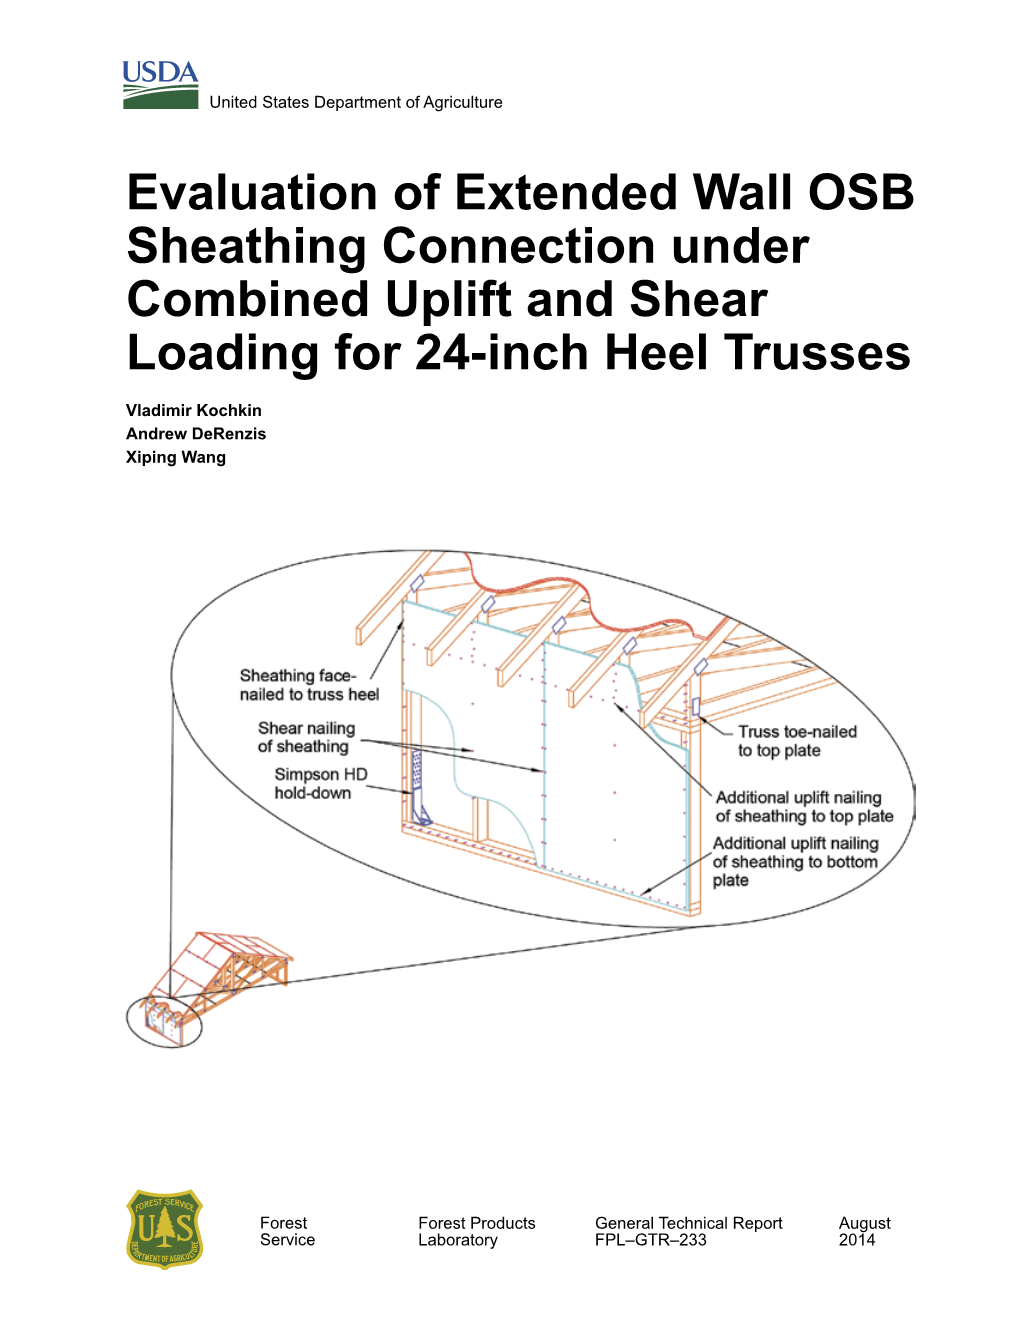 Evaluation of Extended Wall OSB Sheathing Connection Under Combined Uplift and Shear Loading for 24-Inch Heel Trusses